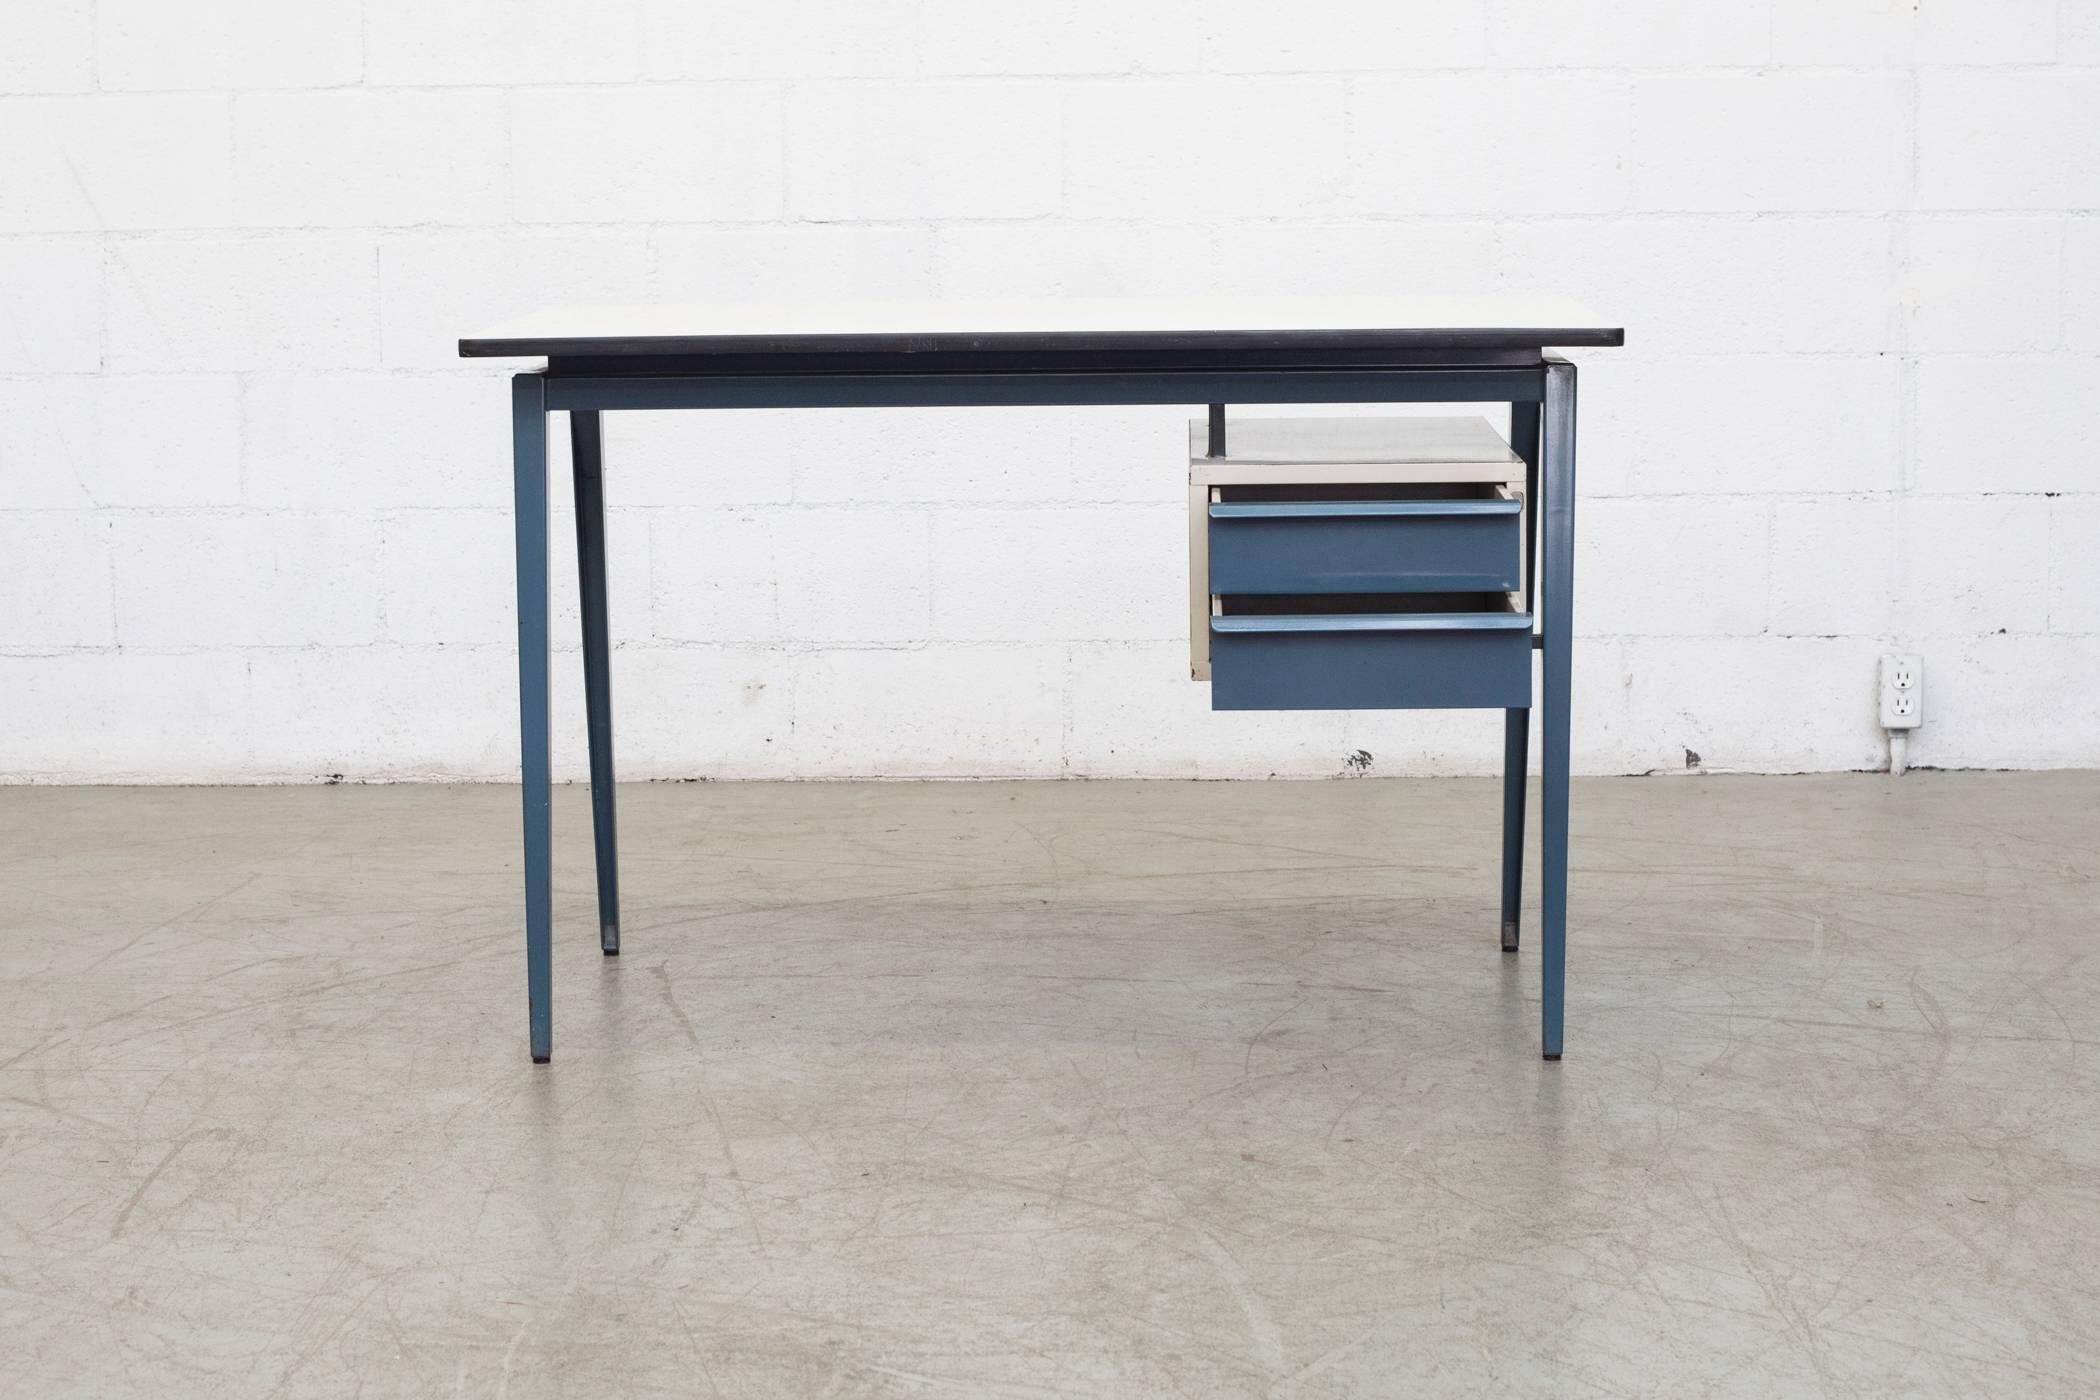 Dutch blue enameled metal drawers and legs with grey cabinet and formica top in original condition with visible signs of wear consistent with its age and usage.